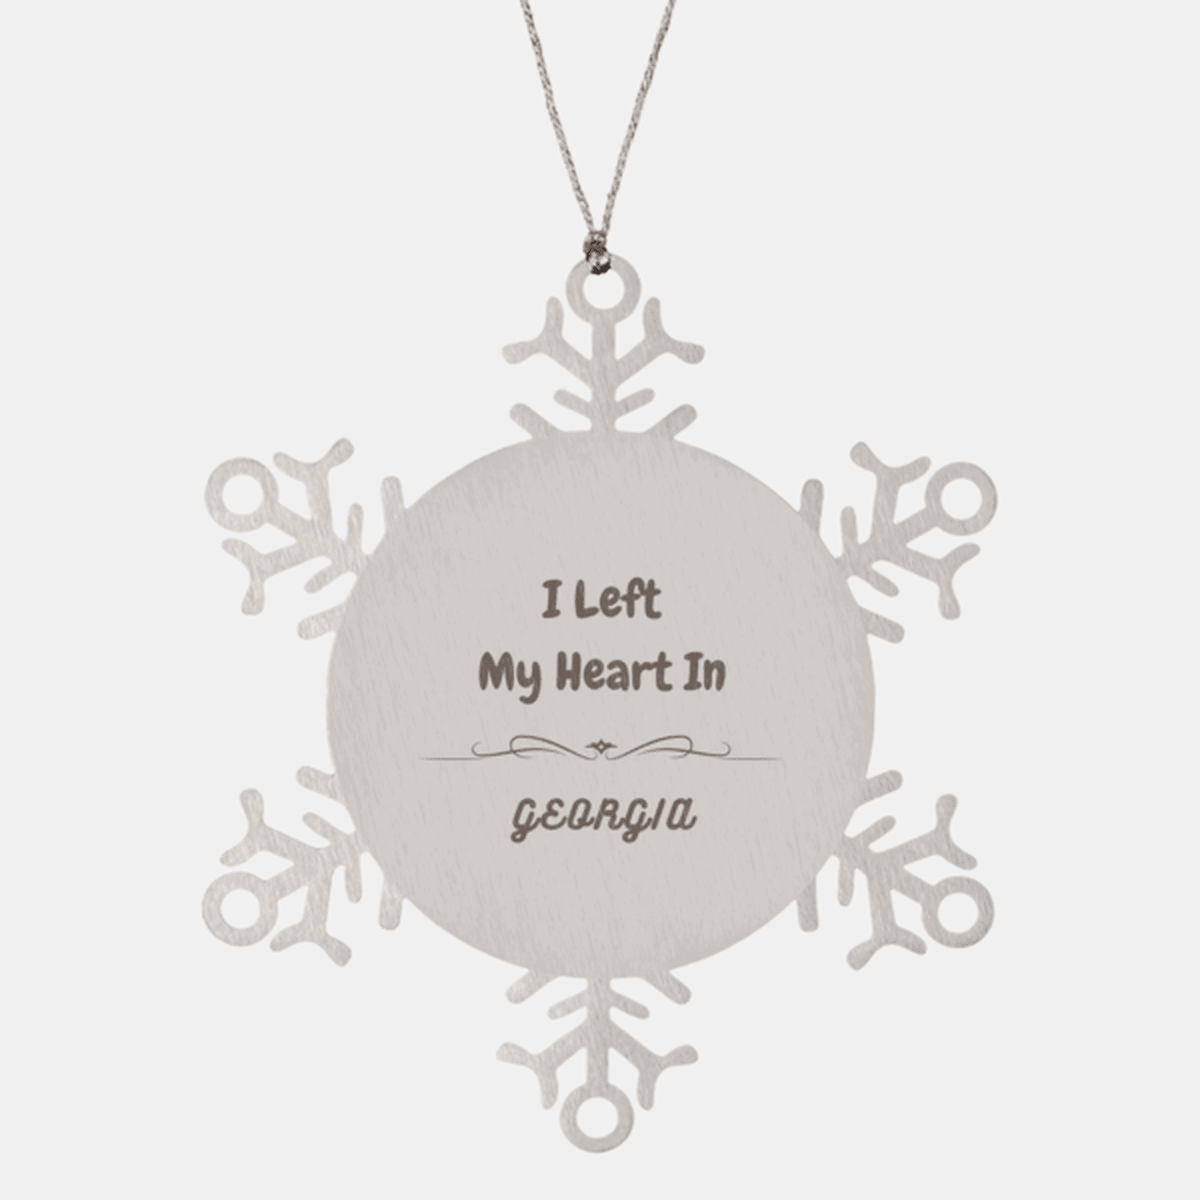 I Left My Heart In Georgia Gifts, Meaningful Georgia State for Friends, Men, Women. Snowflake Ornament for Georgia People - Mallard Moon Gift Shop